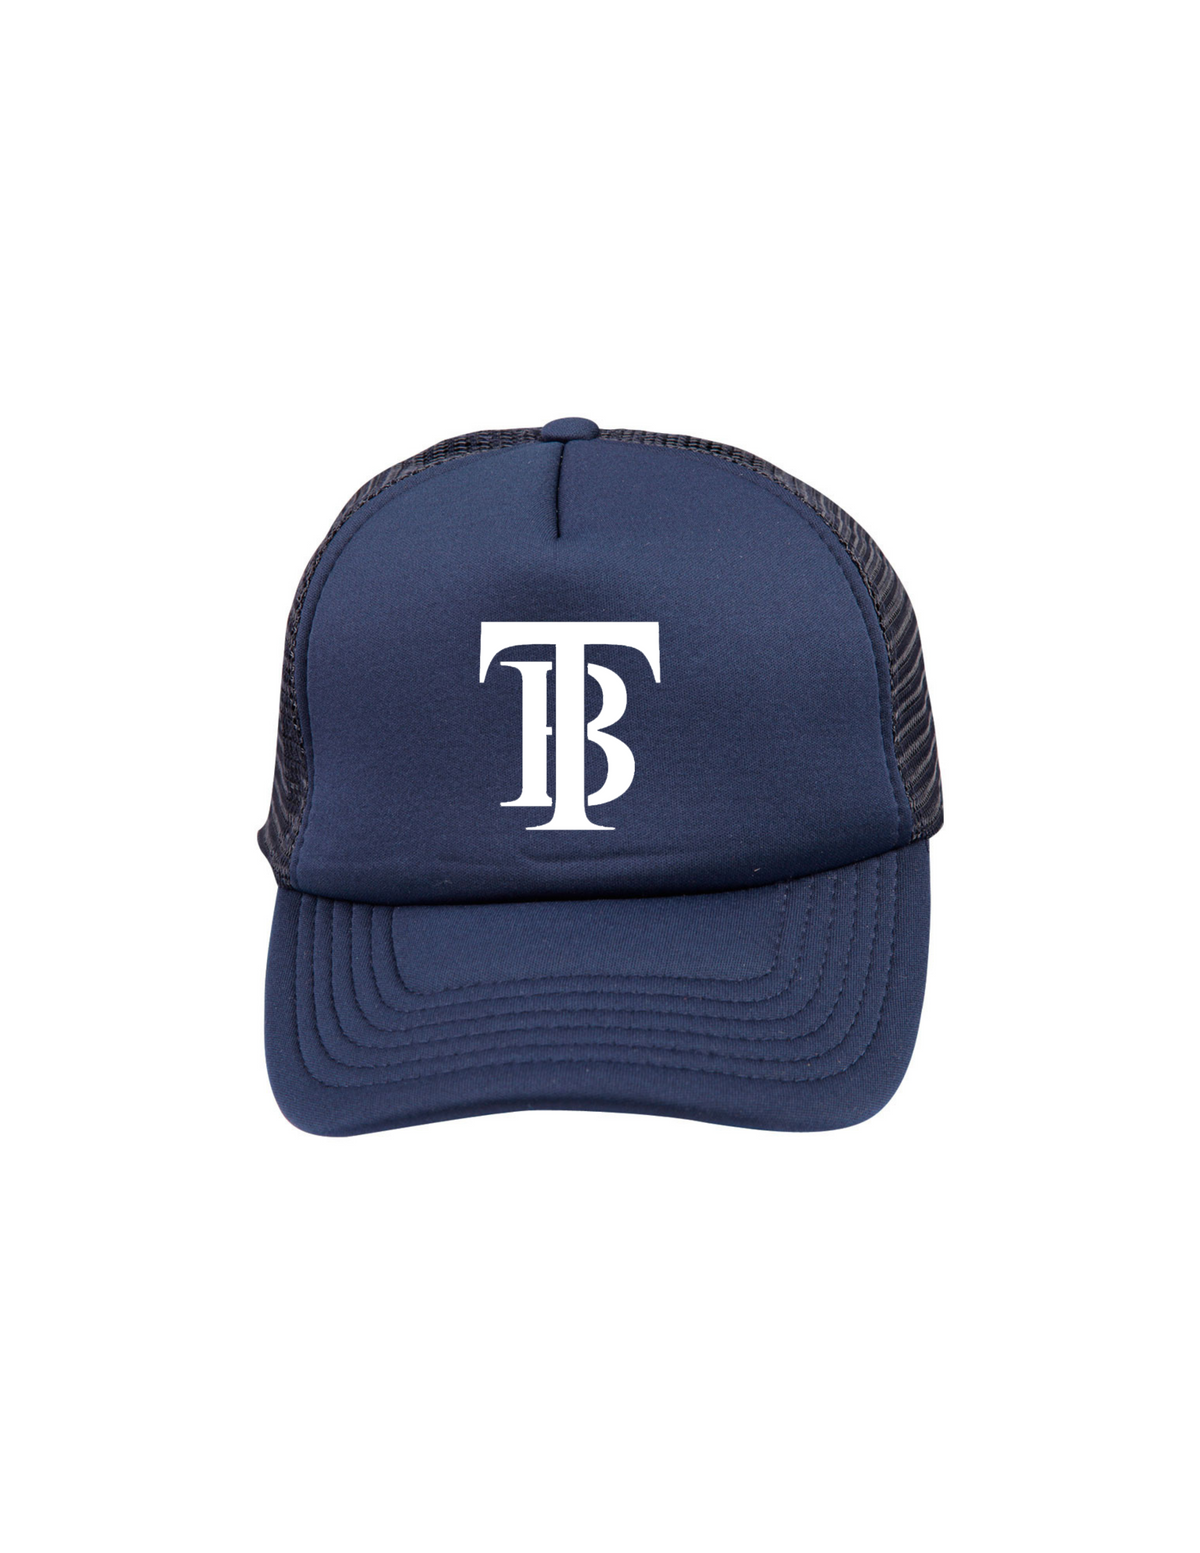 Tumby Bay TB Embroidered 3D Trucker Cap Navy